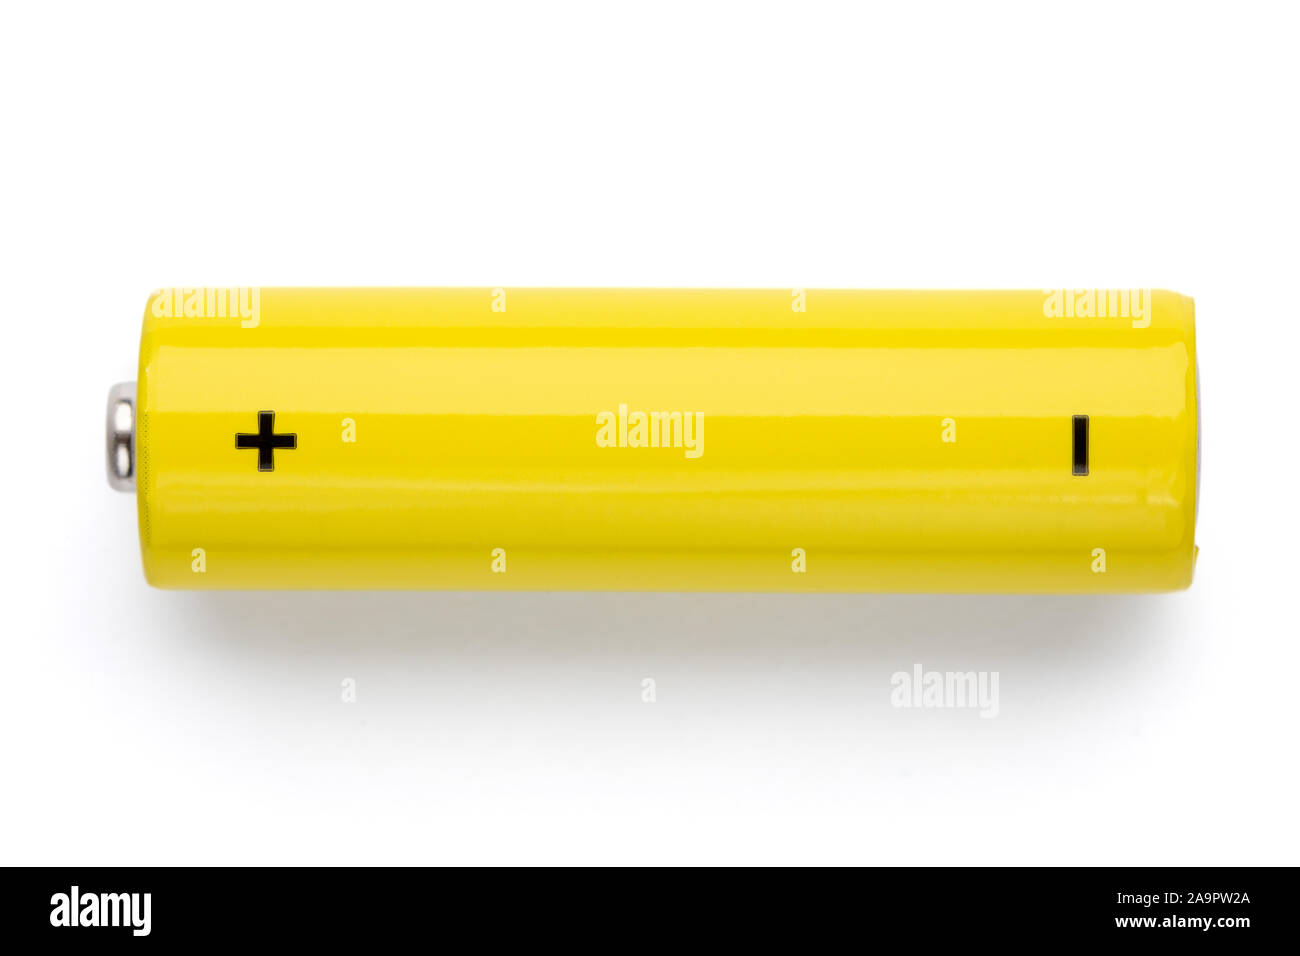 Top view of yellow AA alkaline battery (Mignon) or NiMH rechargeable cell on white background Stock Photo